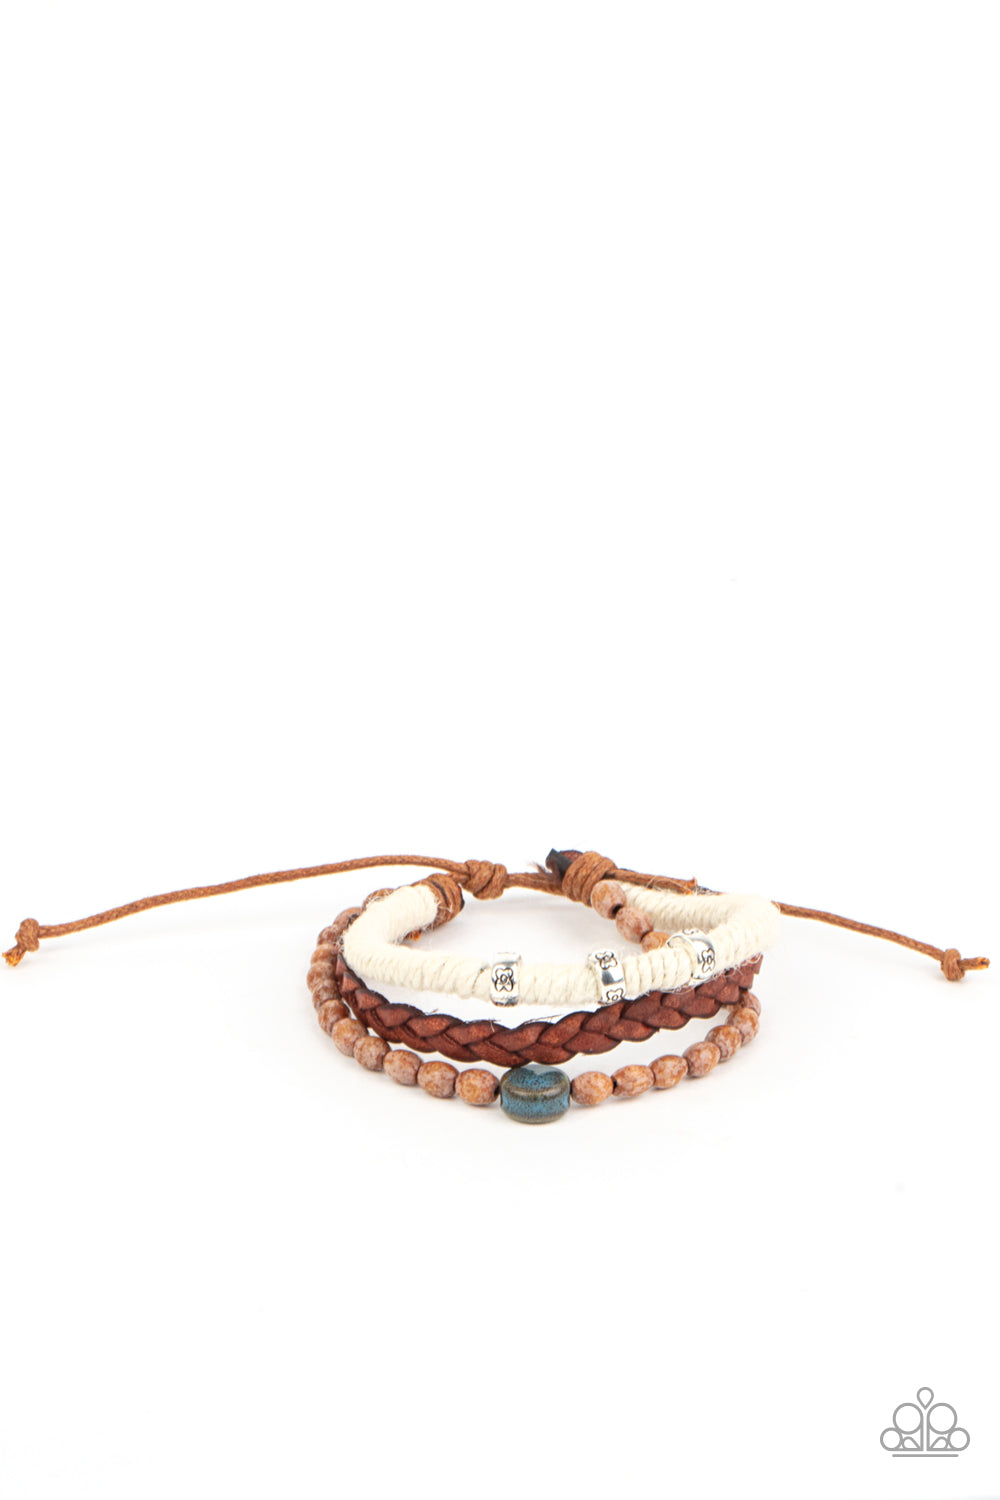 Terrarium Terrain Blue Urban Bracelet - Paparazzi Accessories  Featuring floral stamped accents and a colorful ceramic-like bead, strands of wooden beads, white twine, and braided leather layer around the wrist for an earthy look. Features an adjustable sliding knot closure.  All Paparazzi Accessories are lead free and nickel free!  Sold as one individual bracelet.